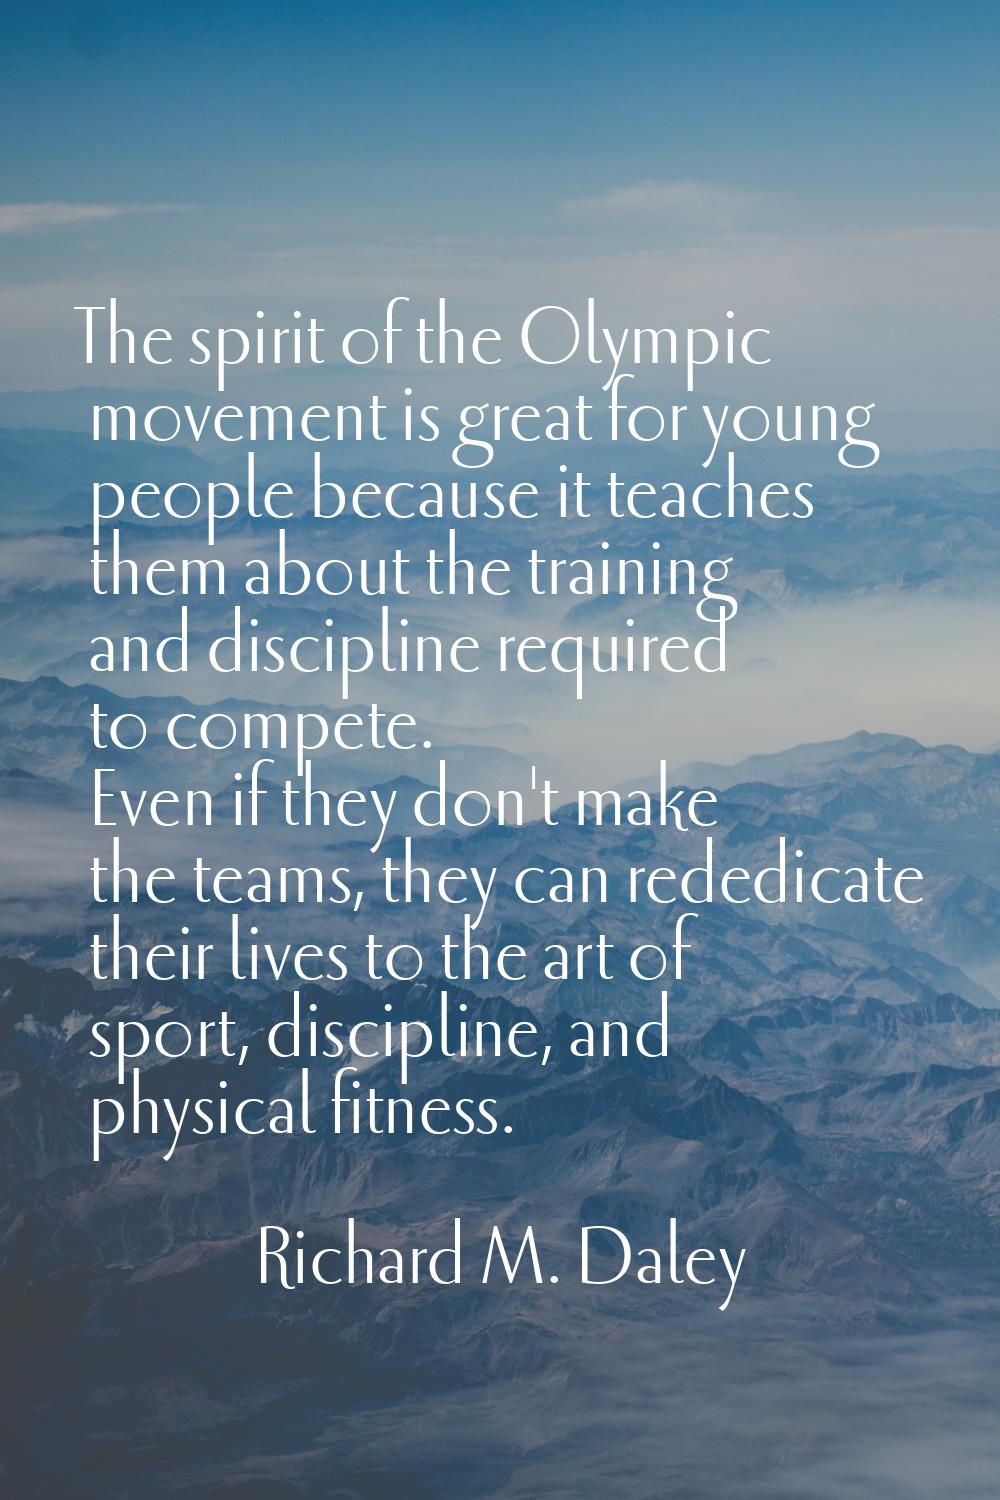 The spirit of the Olympic movement is great for young people because it teaches them about the trai